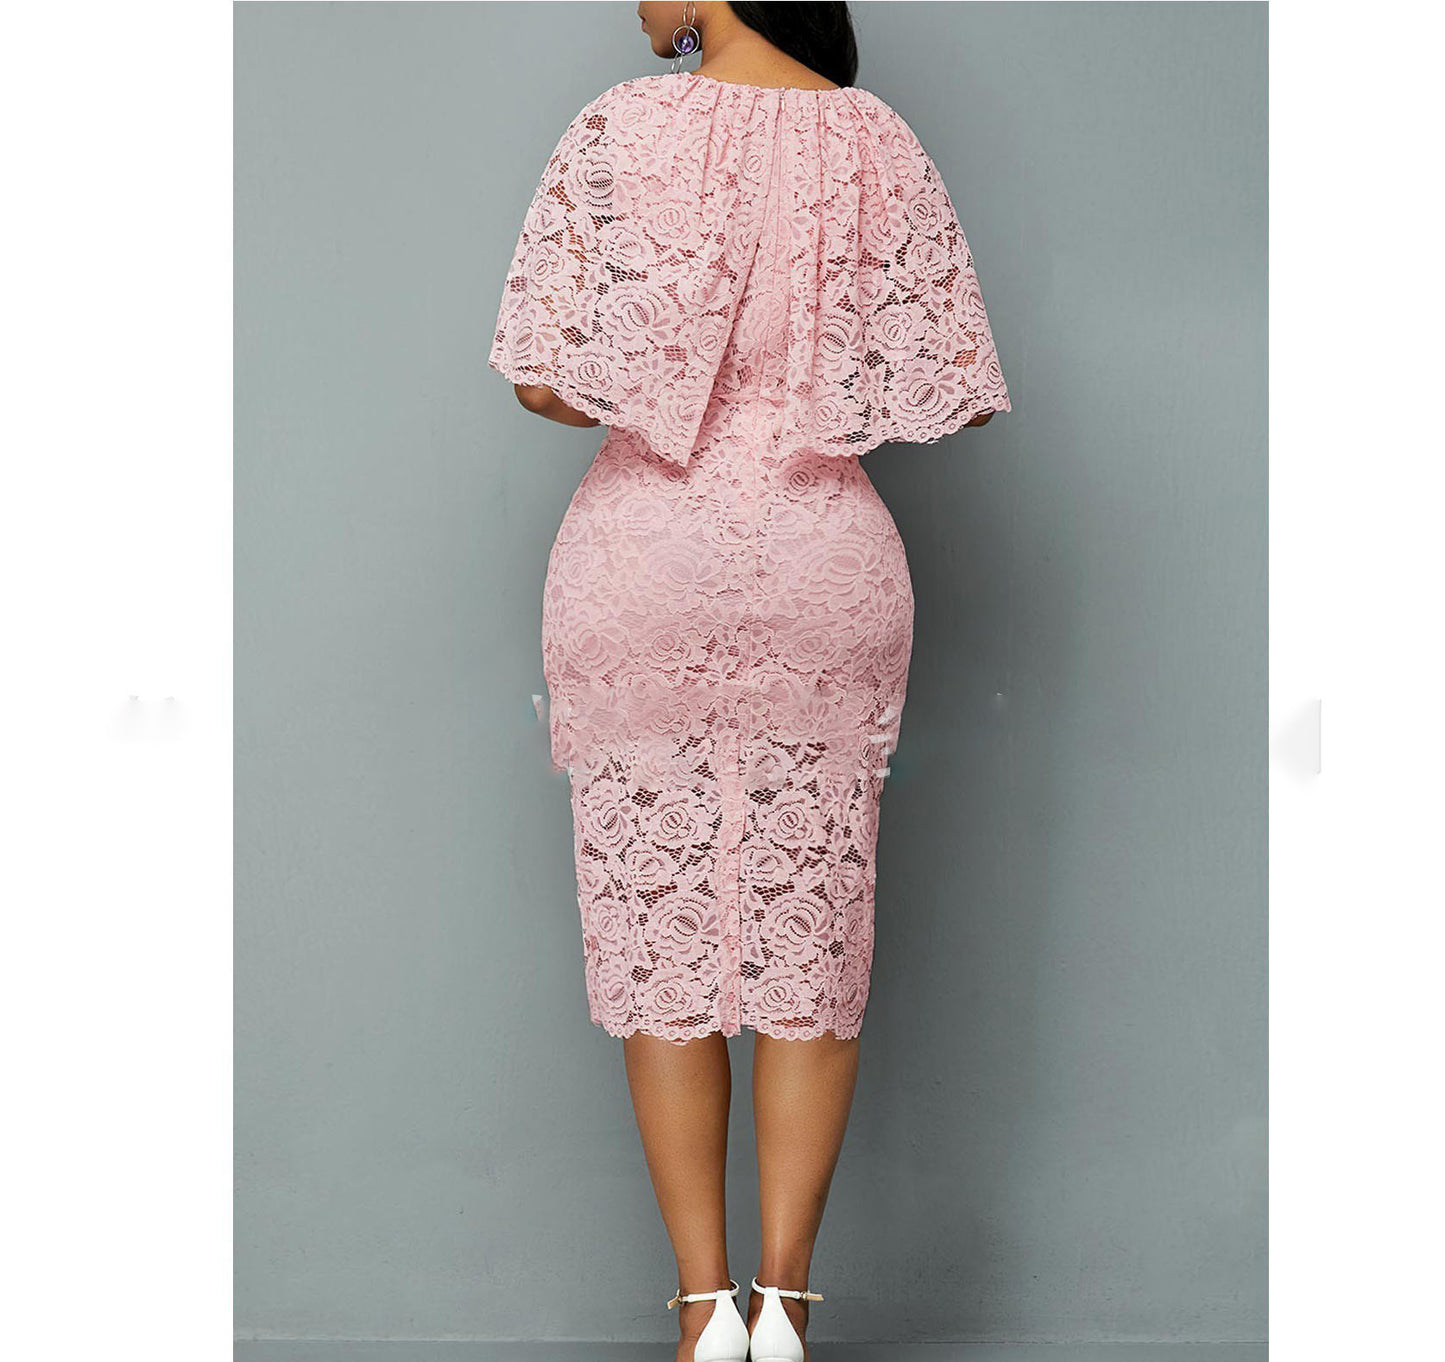 MD African Lace Dresses For Women Fashion New Africa Wedding Outfit Maxi Dress Dashiki Ankara Robe